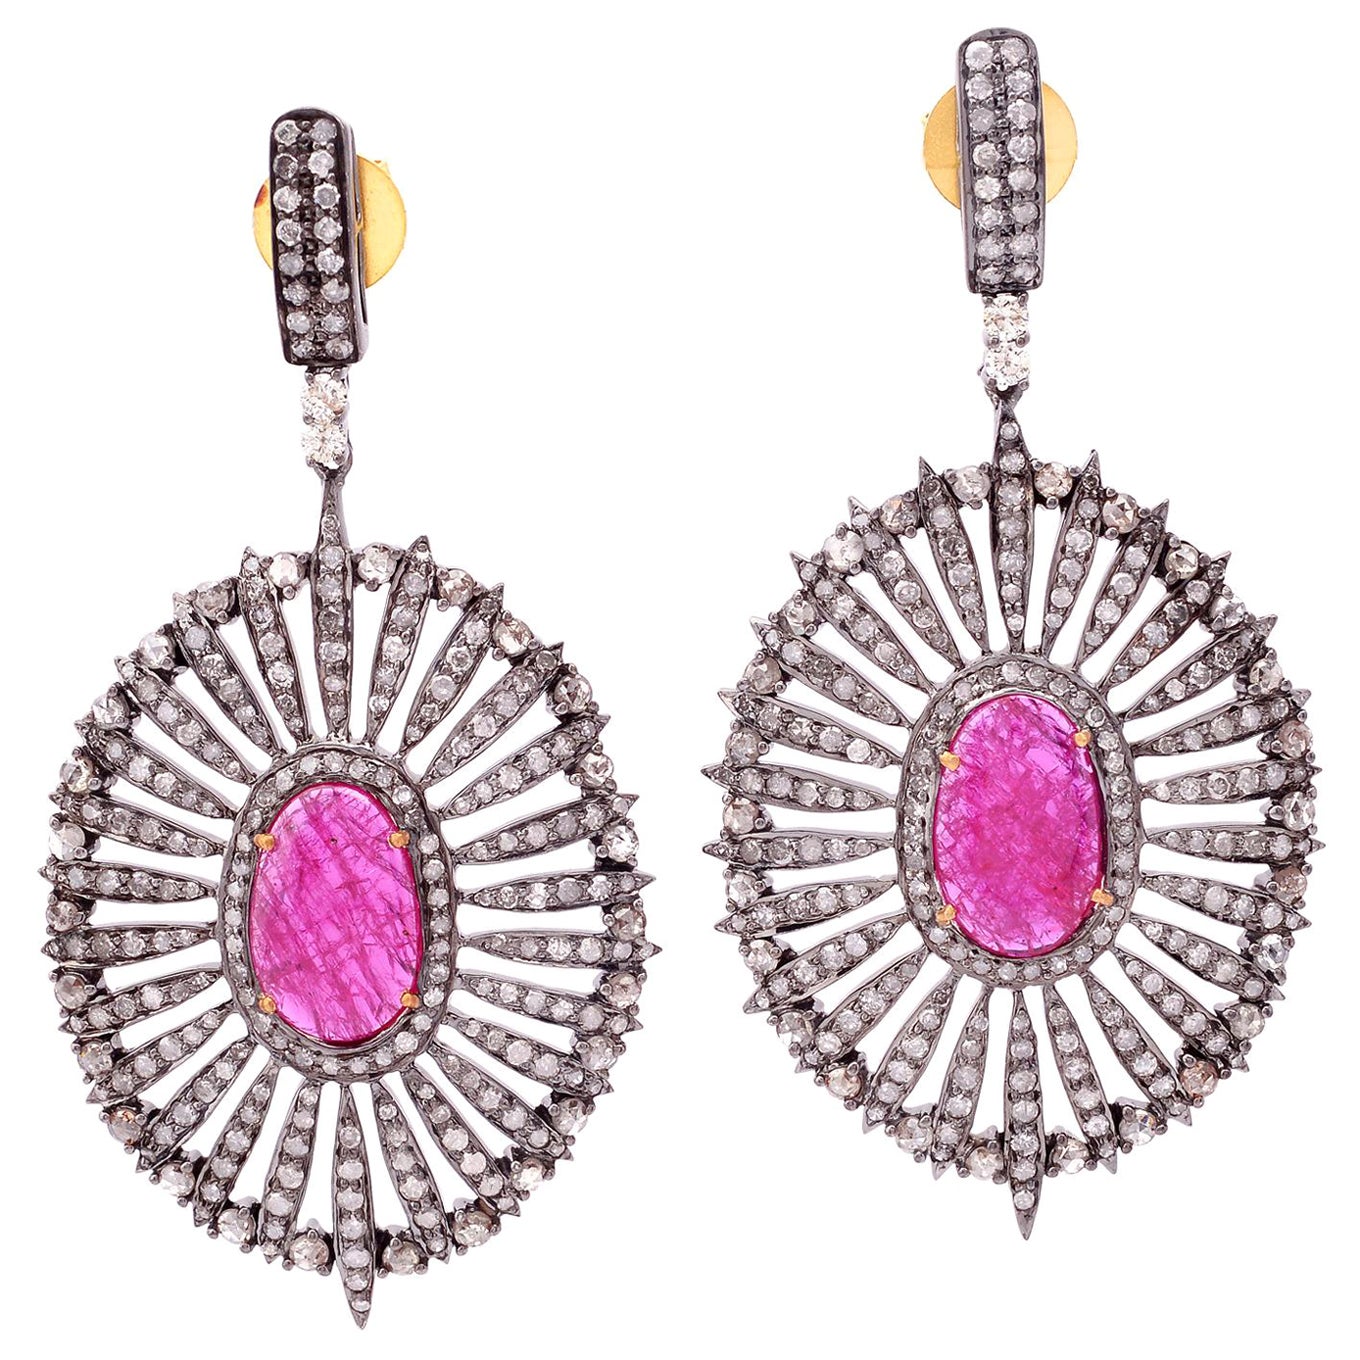 Oval Shaped Ruby Sunburst Earrings with Pave Diamonds In 18k Gold & Silver For Sale